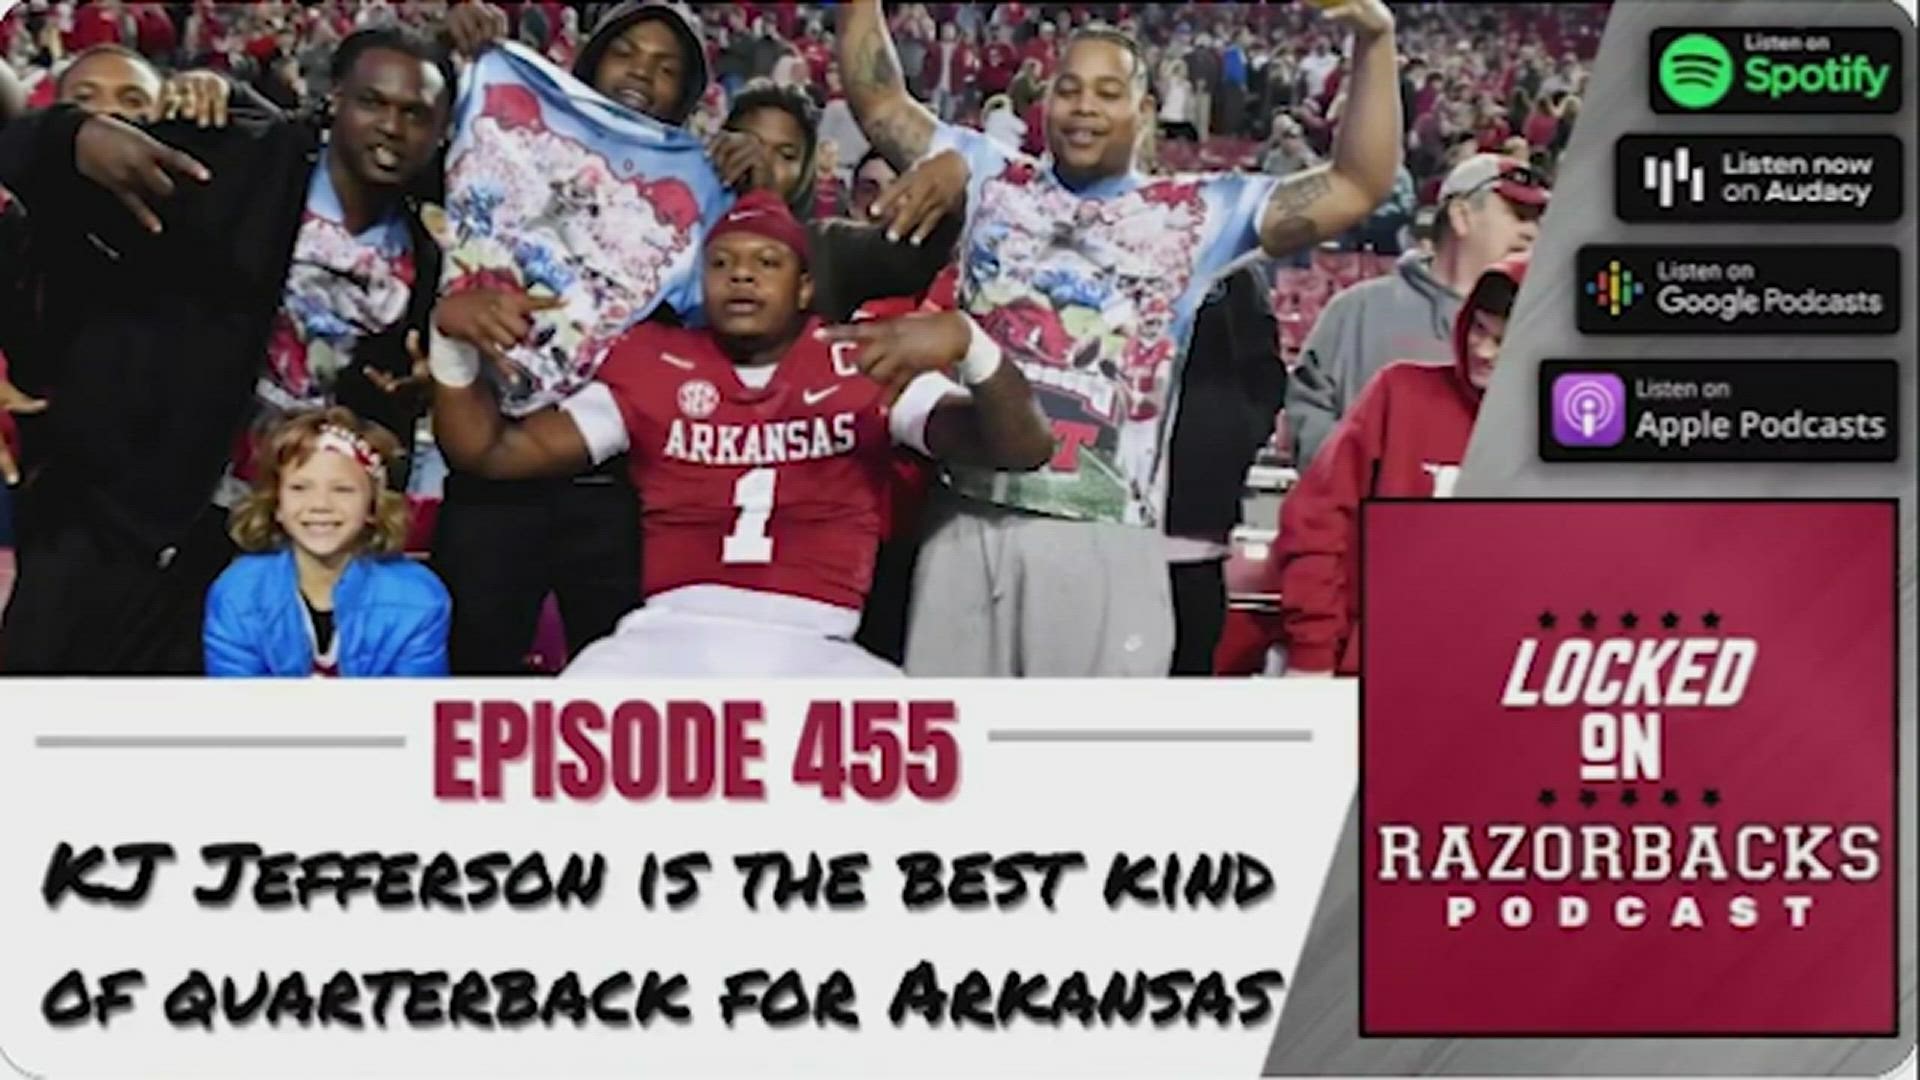 KJ Jefferson is the best kind of quarterback for Arkansas and this unlikely group gave the Razorbacks the win over Mississippi State. All that & more on episode 455.